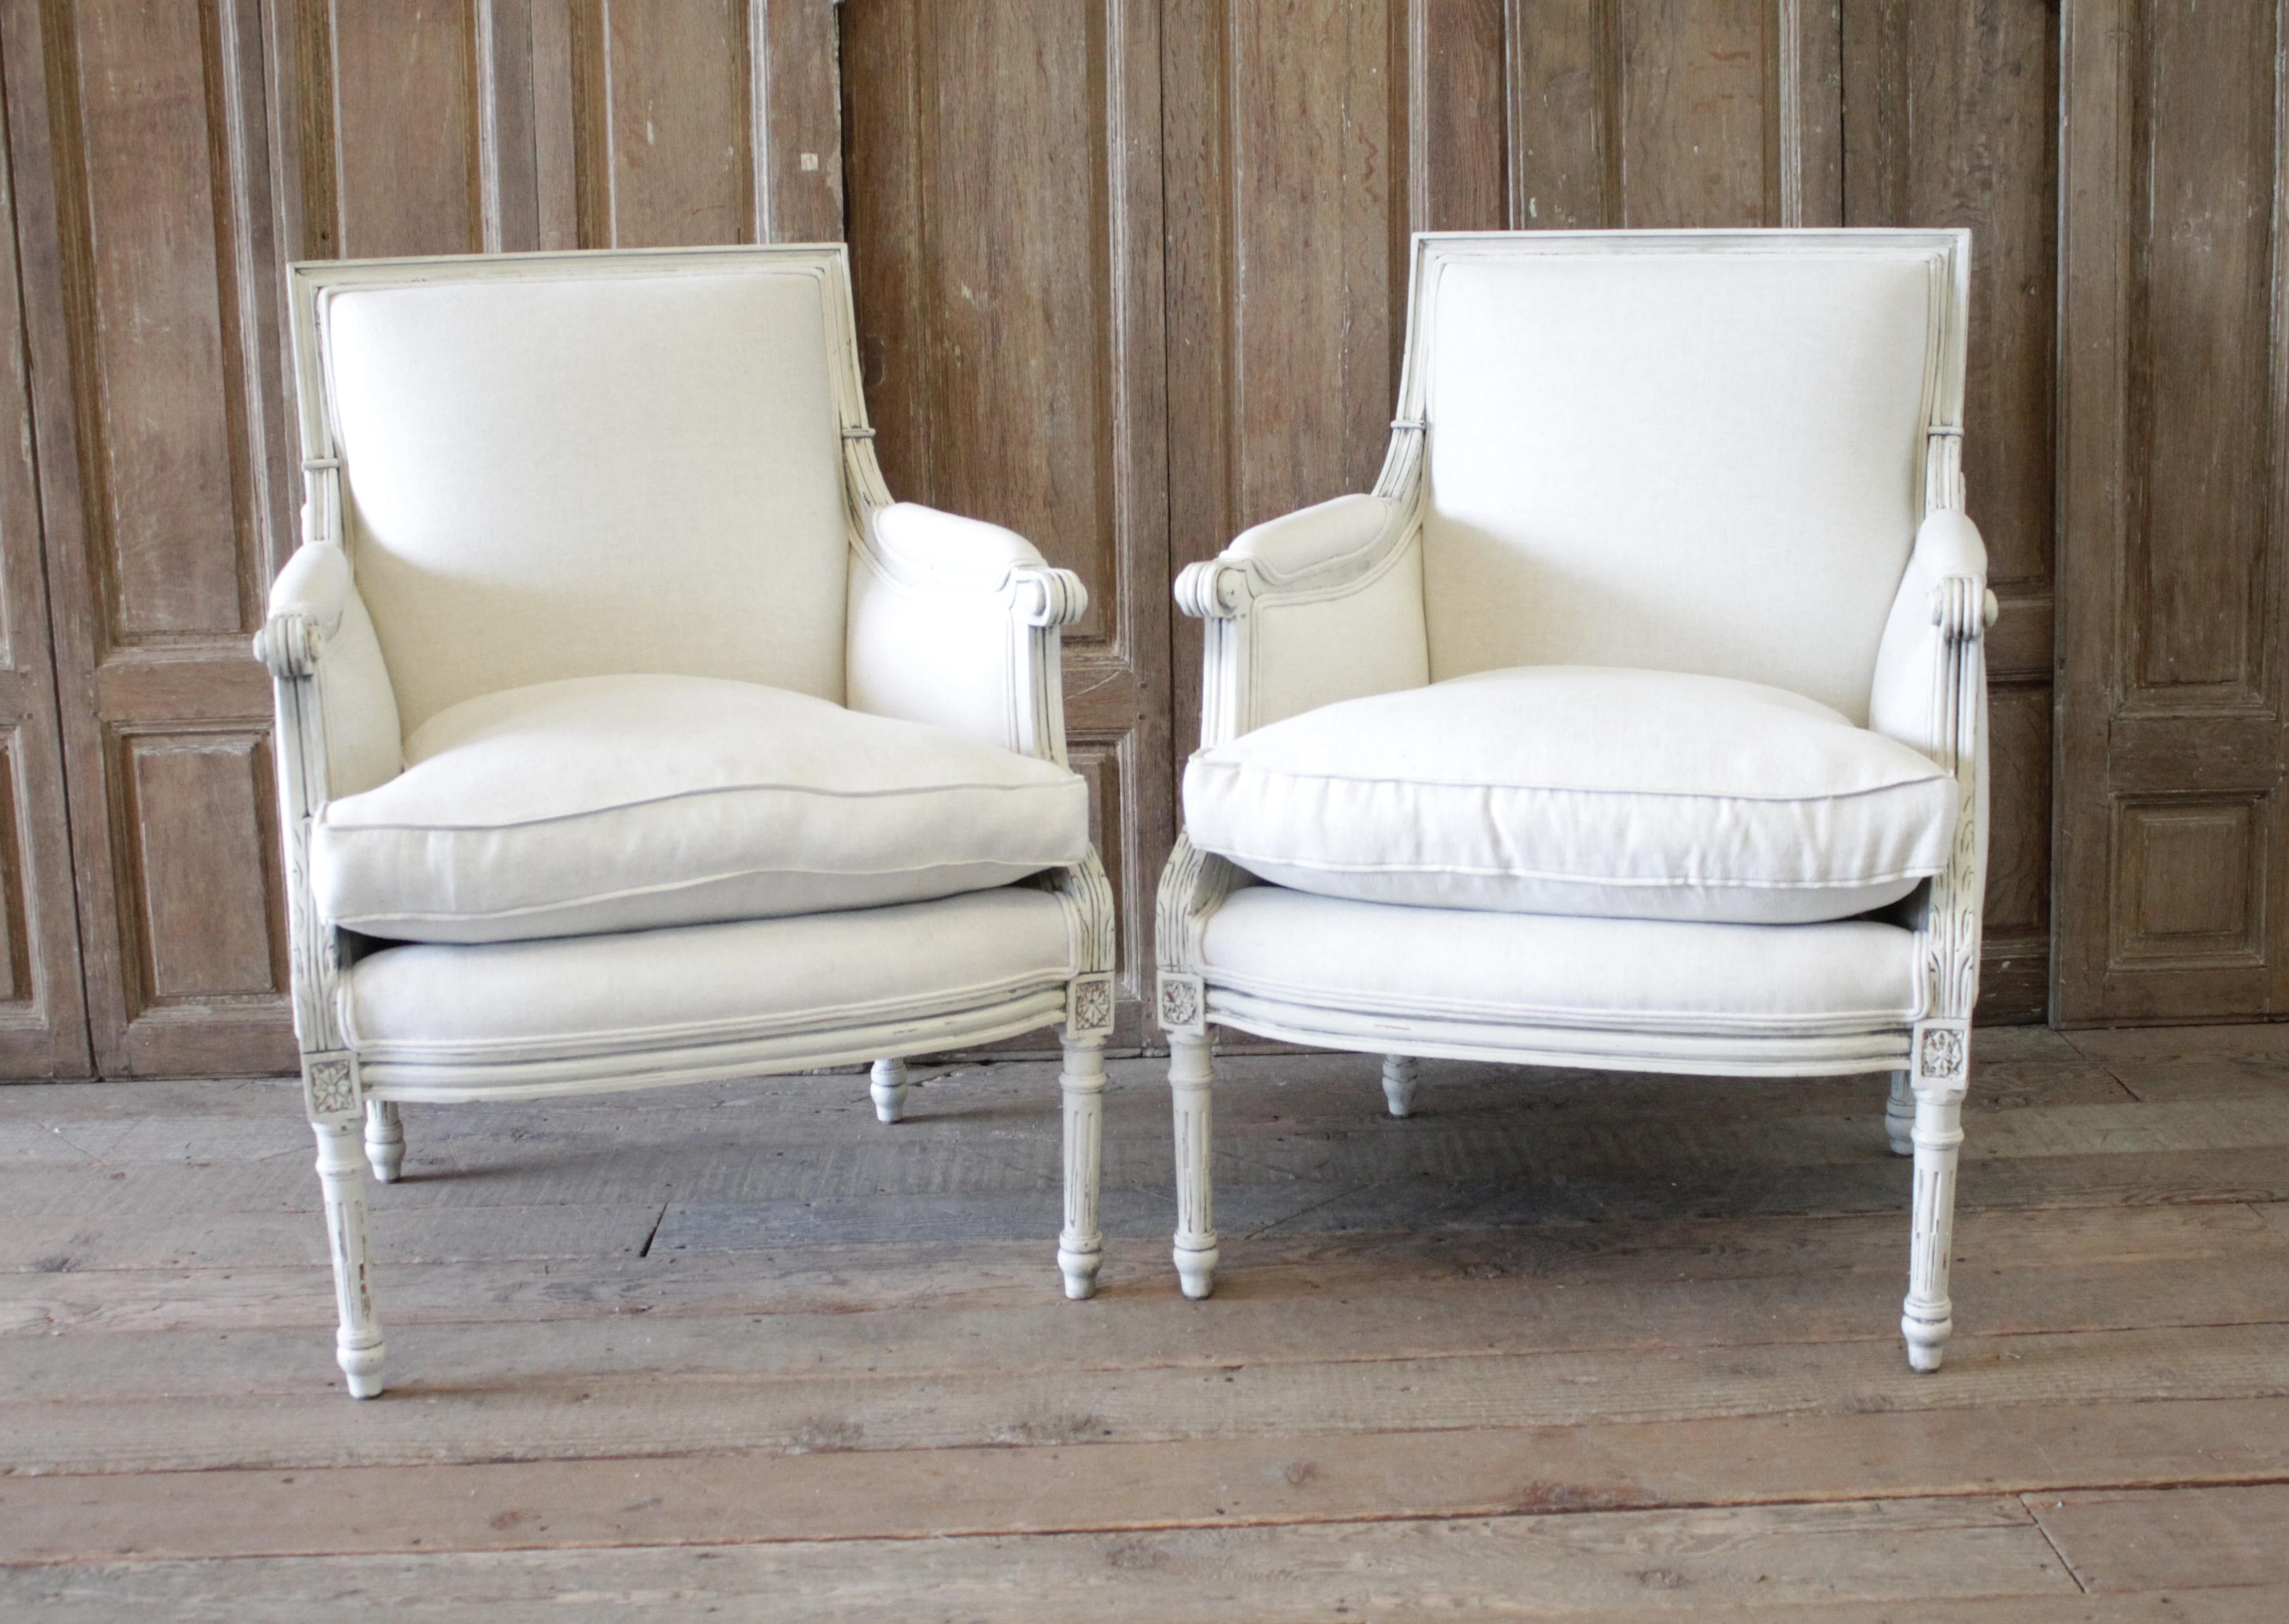 20th century Louis XVI style painted bergère chairs in natural linen.
Painted in a soft white with subtle distressed edges, and finished with an antique glazed patina. Classic clean lines, with a fluted leg. The upholstery has been redone in a